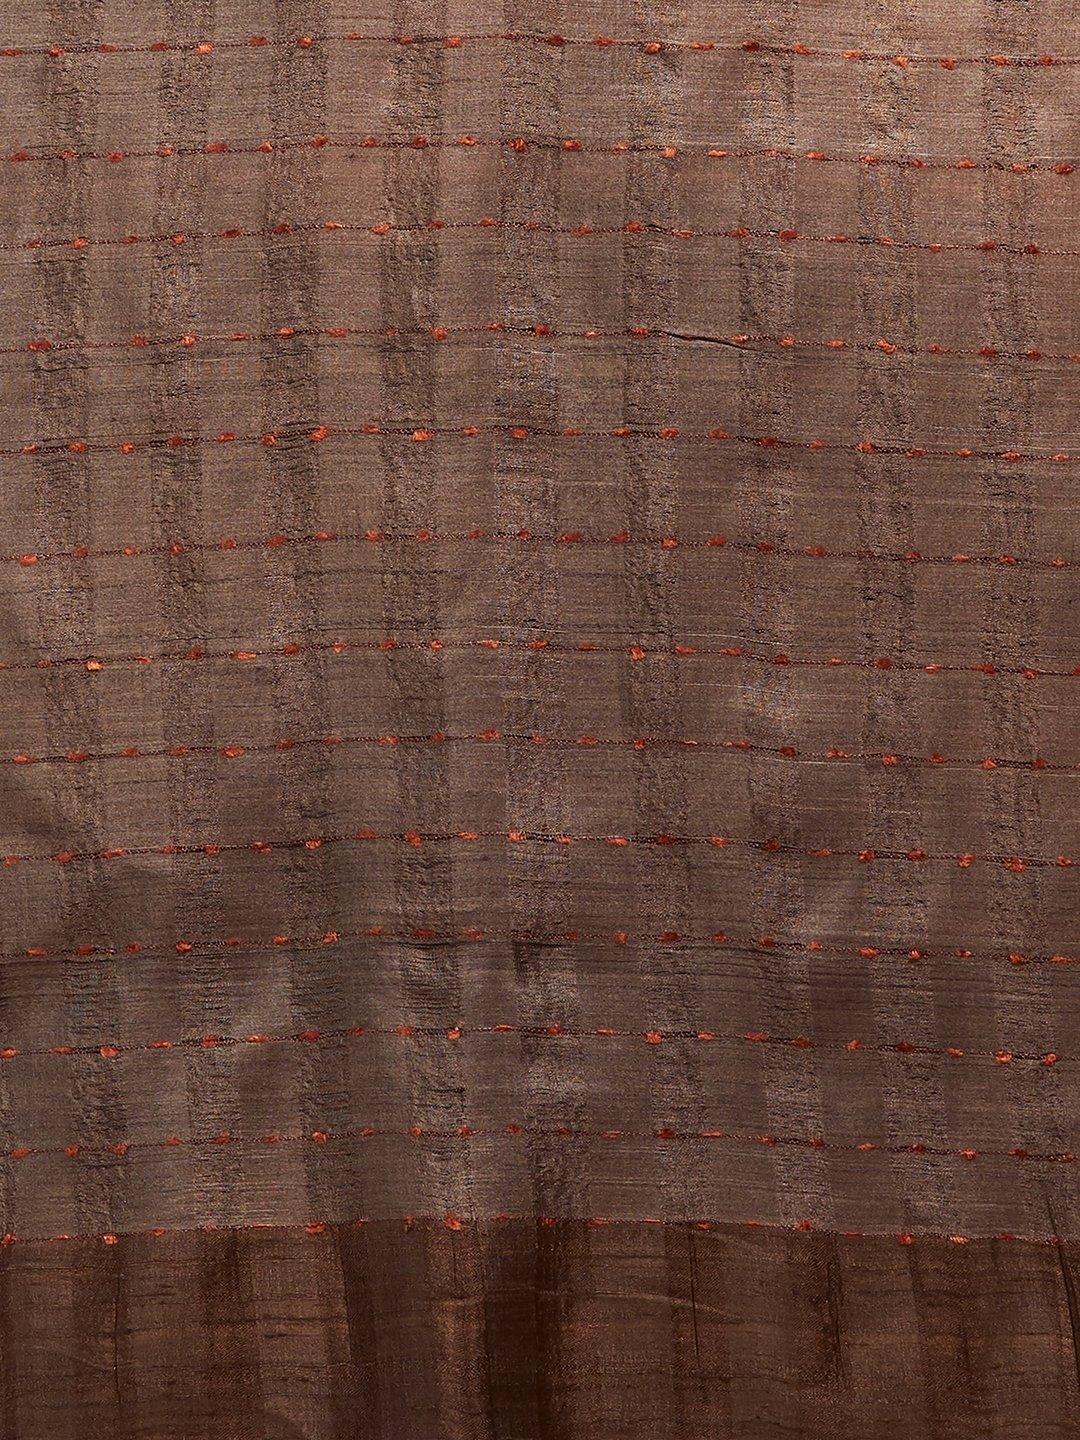 CraftsCollection.in -Brown Tussar Silk Stole